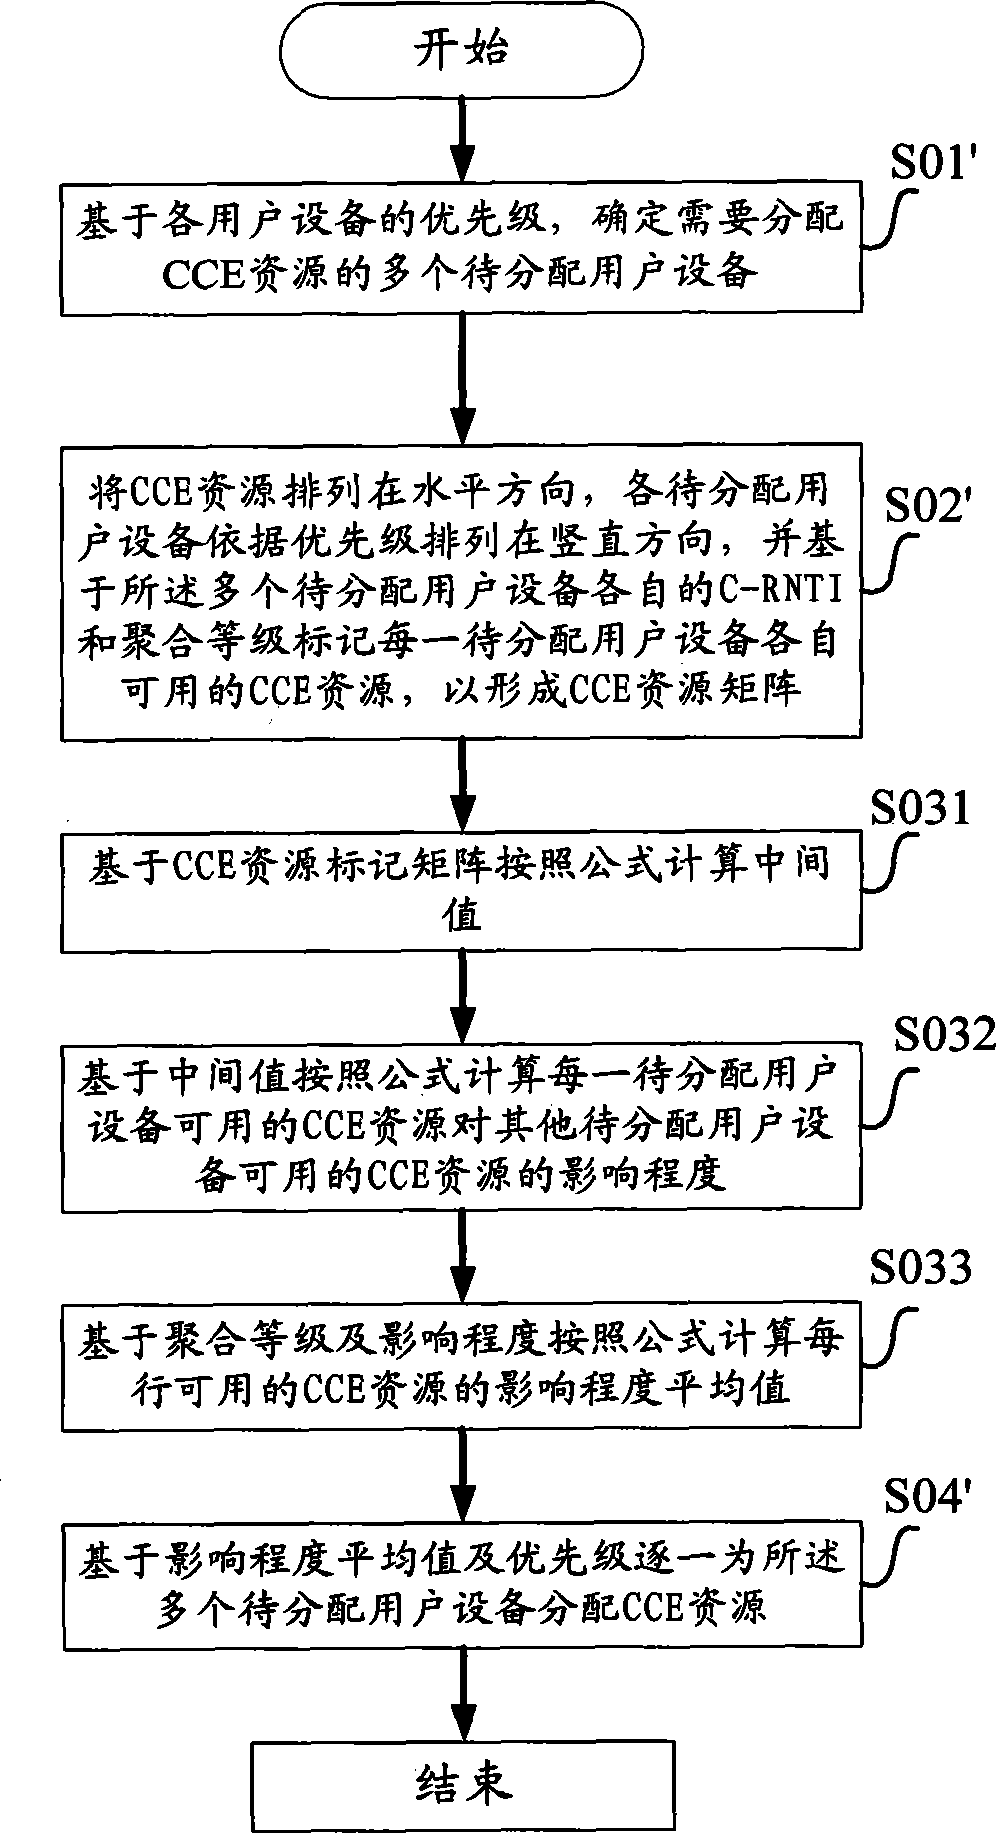 Method and equipment for carrying out CCE (Control Channel Element) resource allocation in communication system